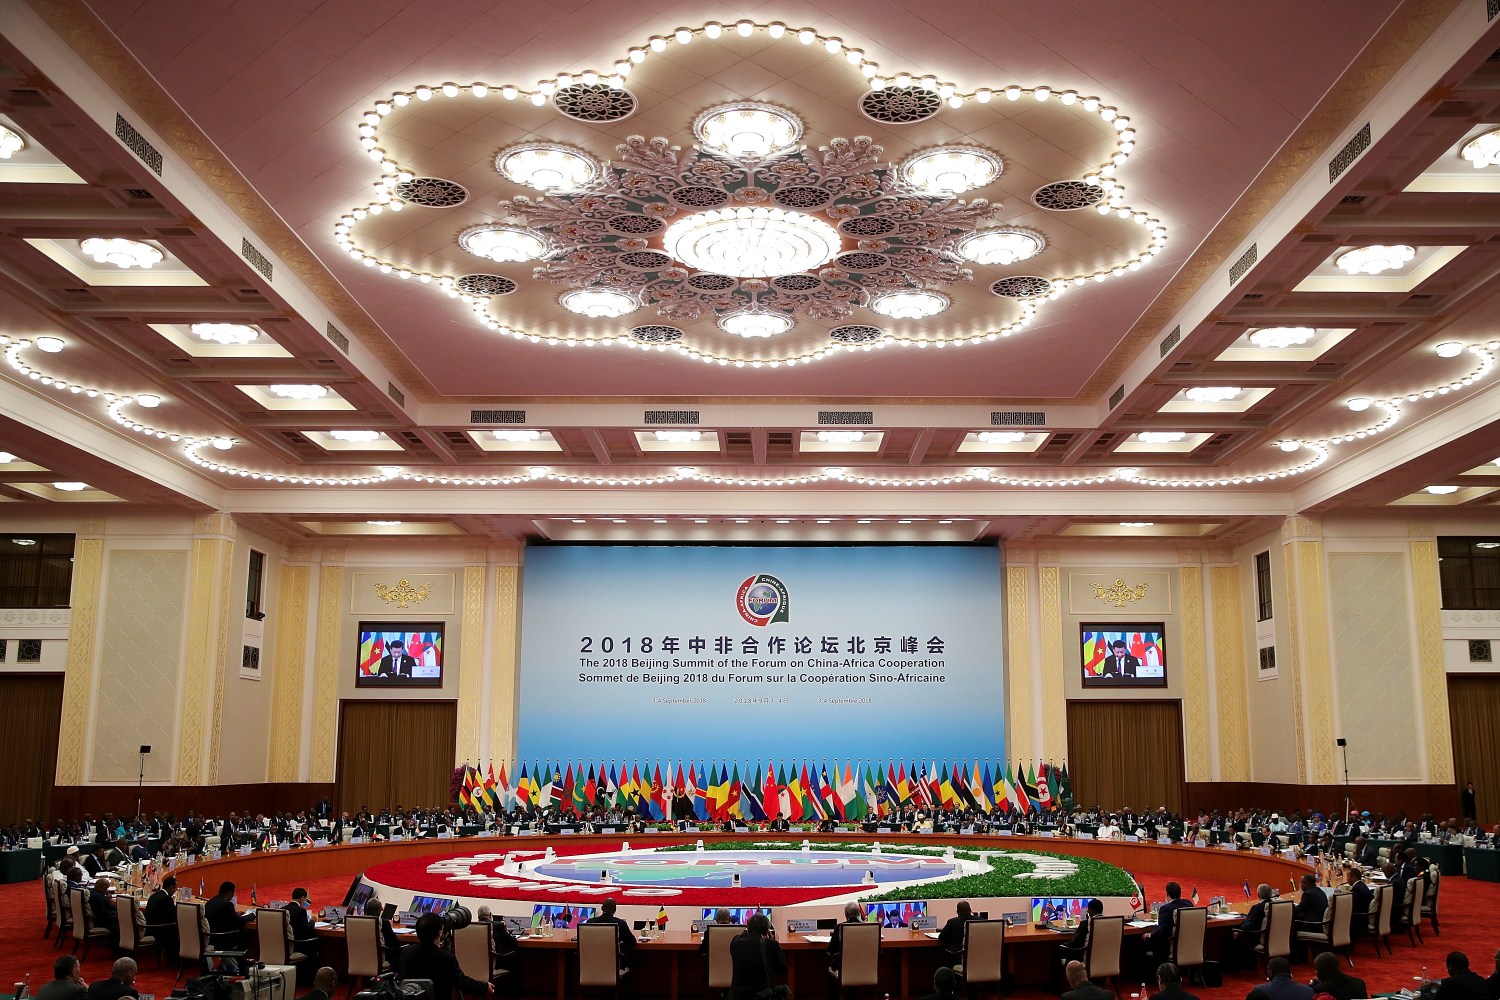 Chinese President Xi Jinping speaks during the 2018 Beijing Summit Of The Forum On China-Africa Cooperation - Round Table Conference at the Great Hall of the People in Beijing, China September 4, 2018. Lintao Zhang/Pool via REUTERS - RC1696DECD60